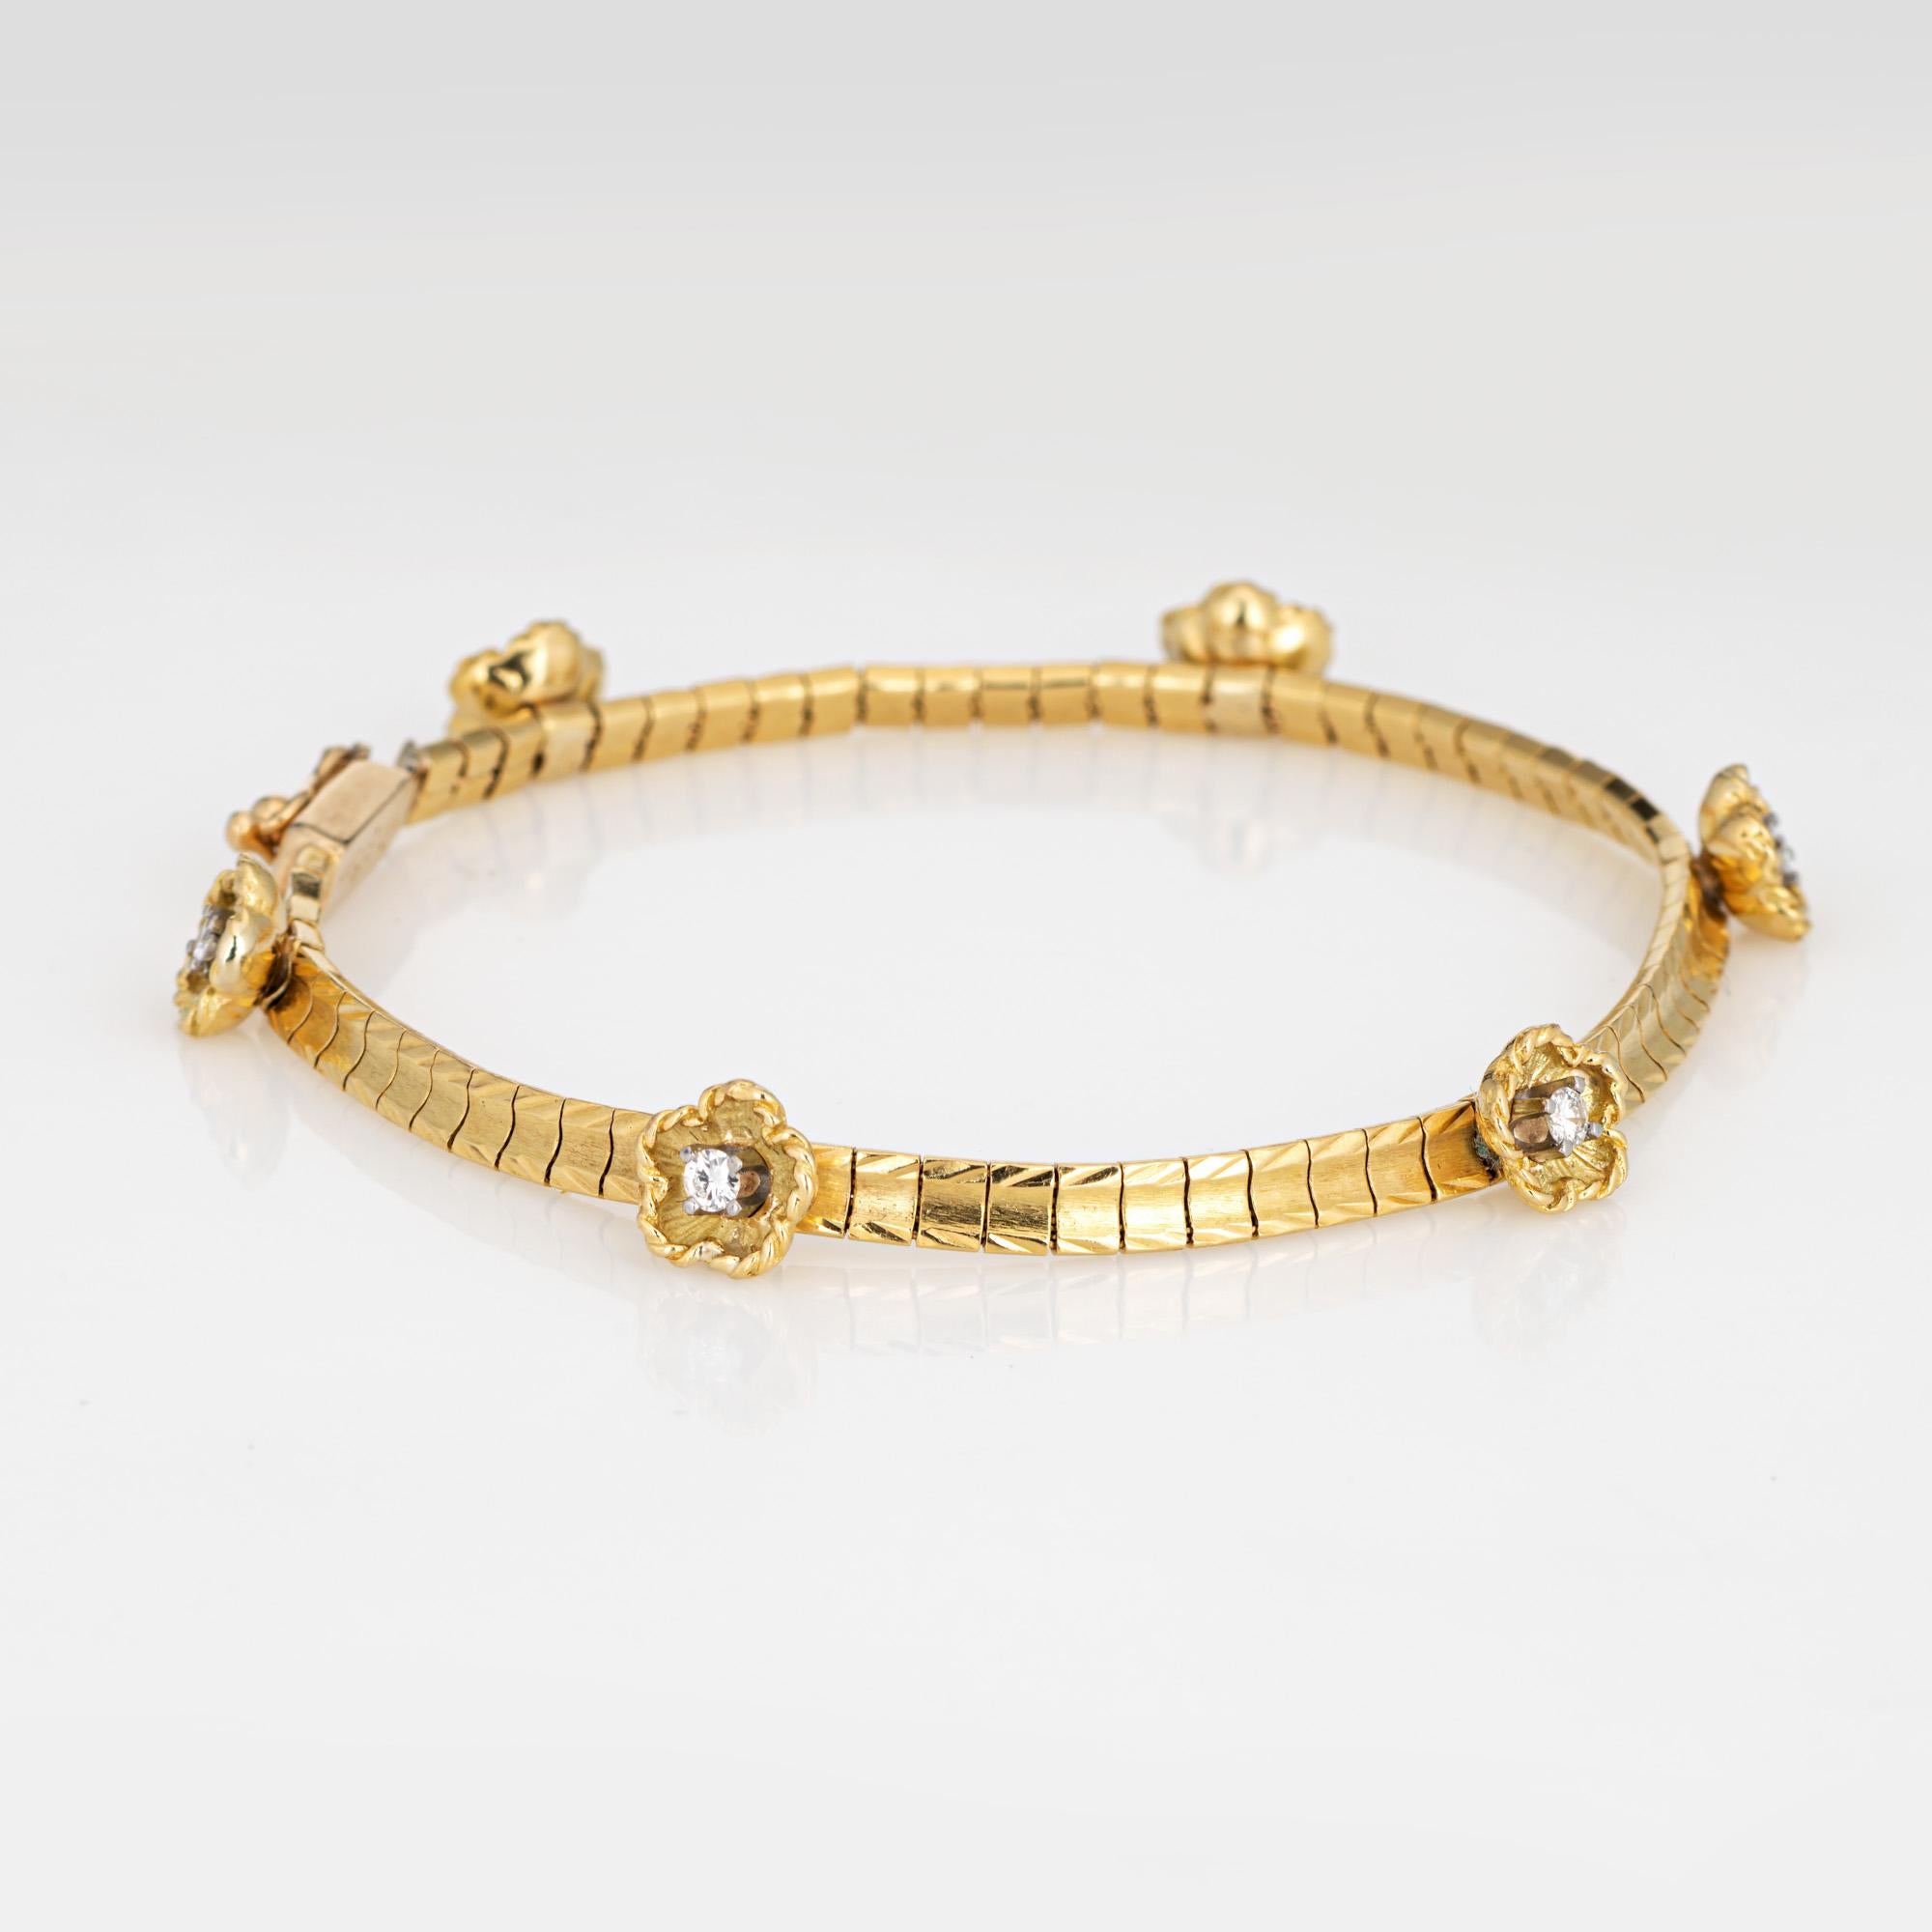 Finely detailed vintage diamond flower bracelet (circa 1950s to 1960s), crafted in 14k yellow gold. 

6 round brilliant cut diamonds total an estimated 0.15 carats (estimated at I-J color and VS2-SI2 clarity).
The stylish bracelet features 6 raised